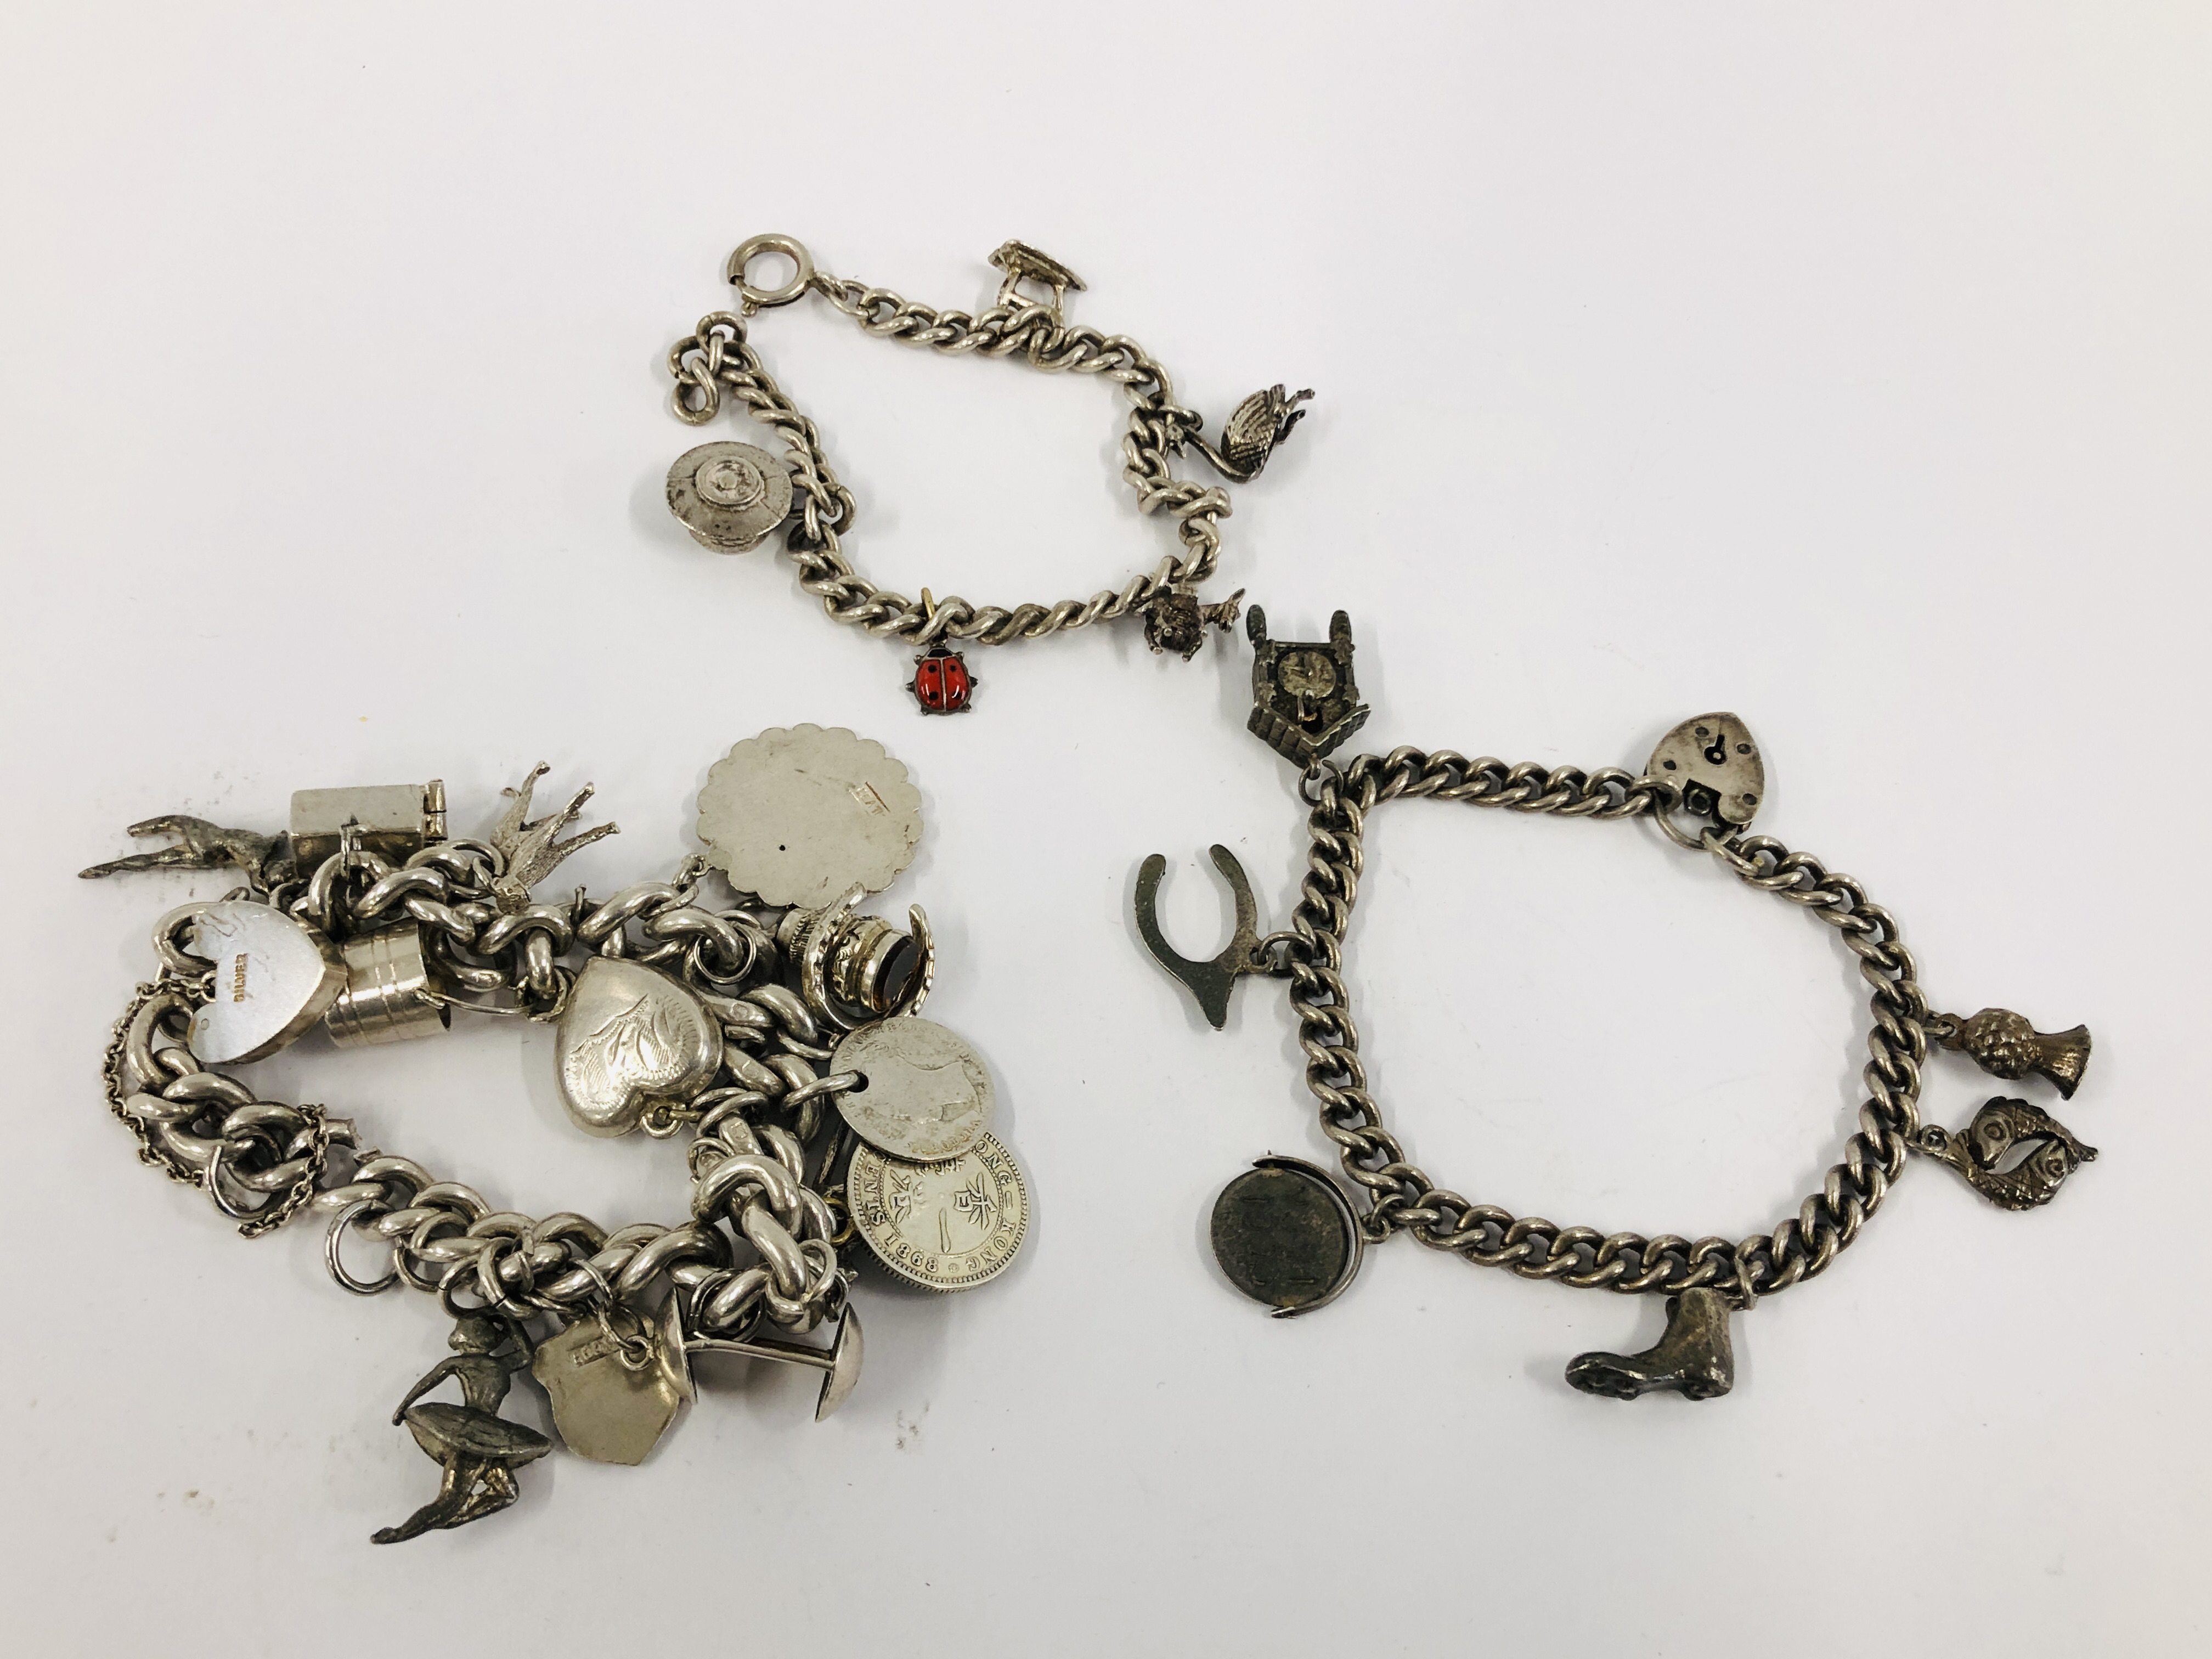 THREE VINTAGE SILVER CHARM BRACELETS TO INCLUDE VARIOUS SILVER AND WHITE METAL CHARMS.